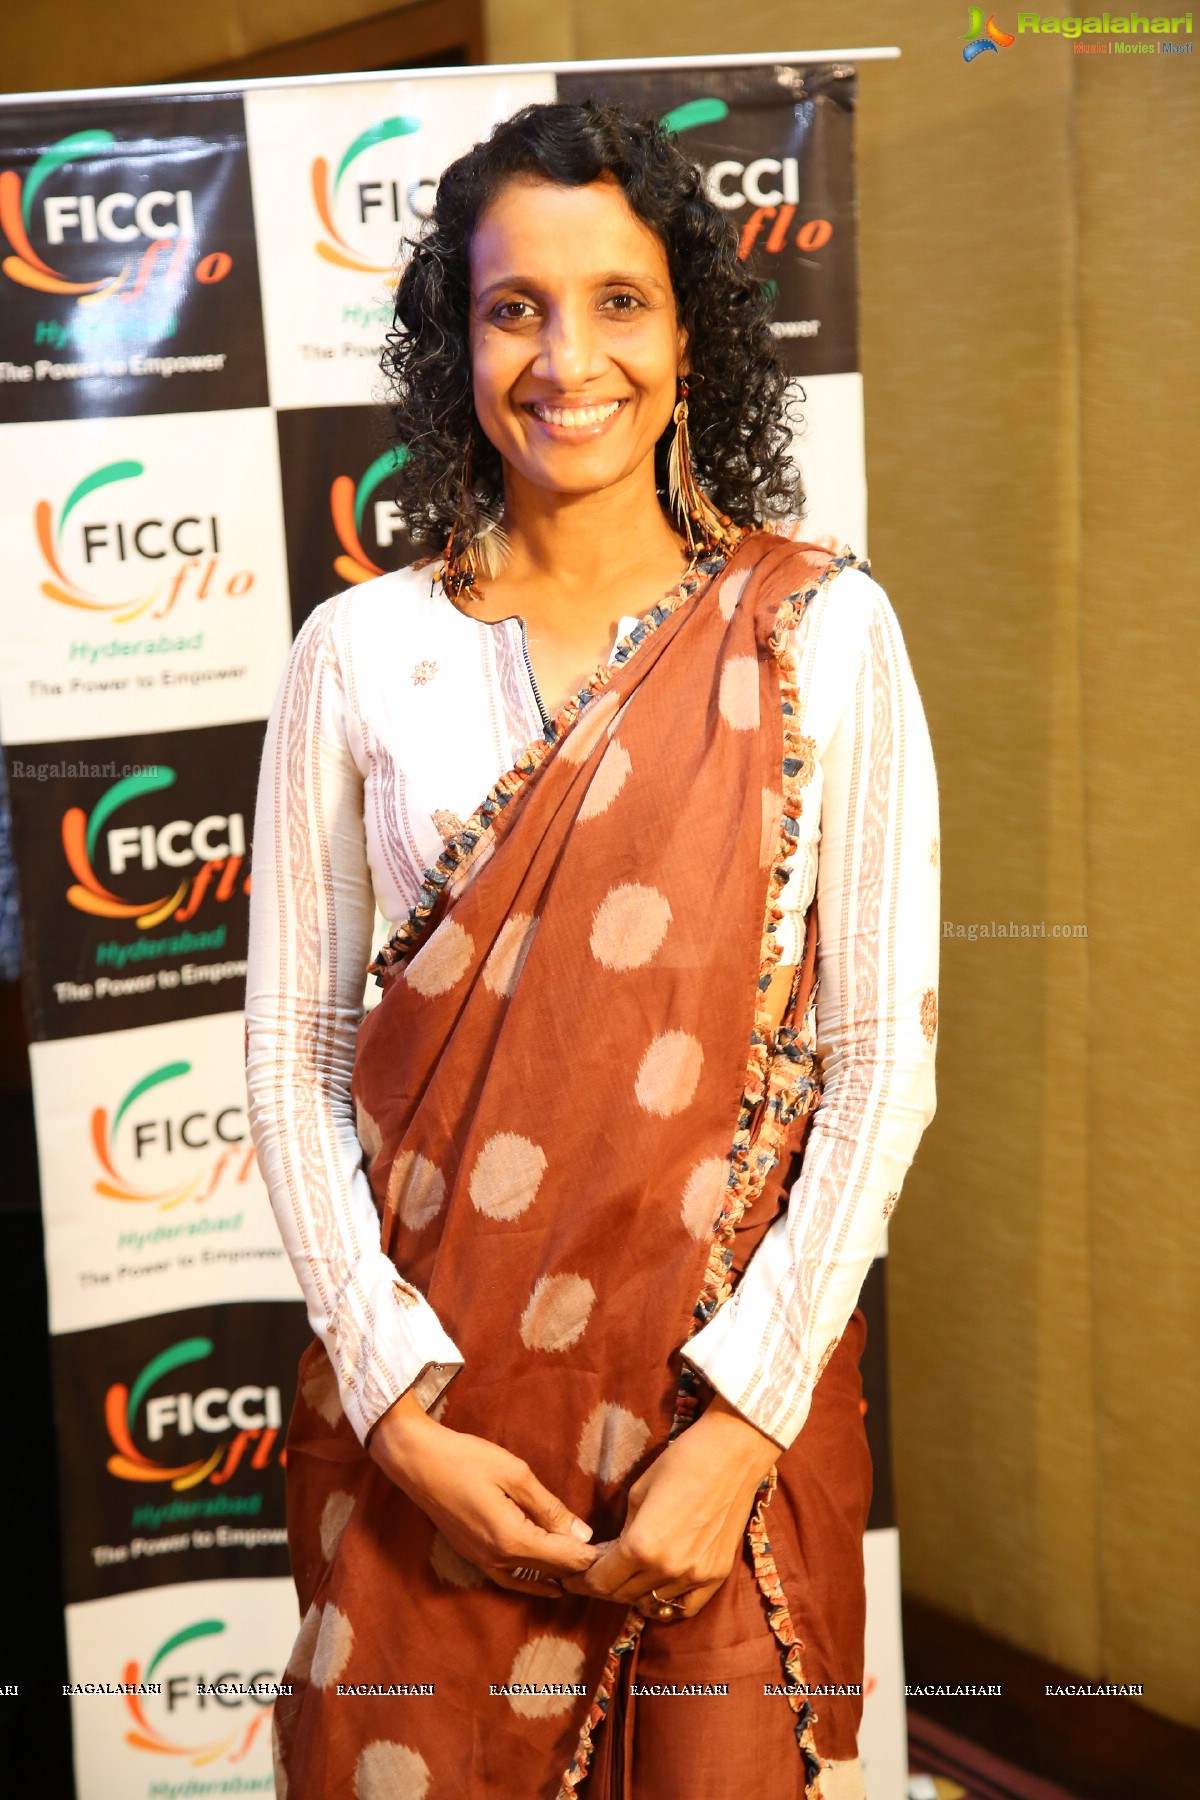 FICCI FLO Interactive Session on 4 Different Subjects